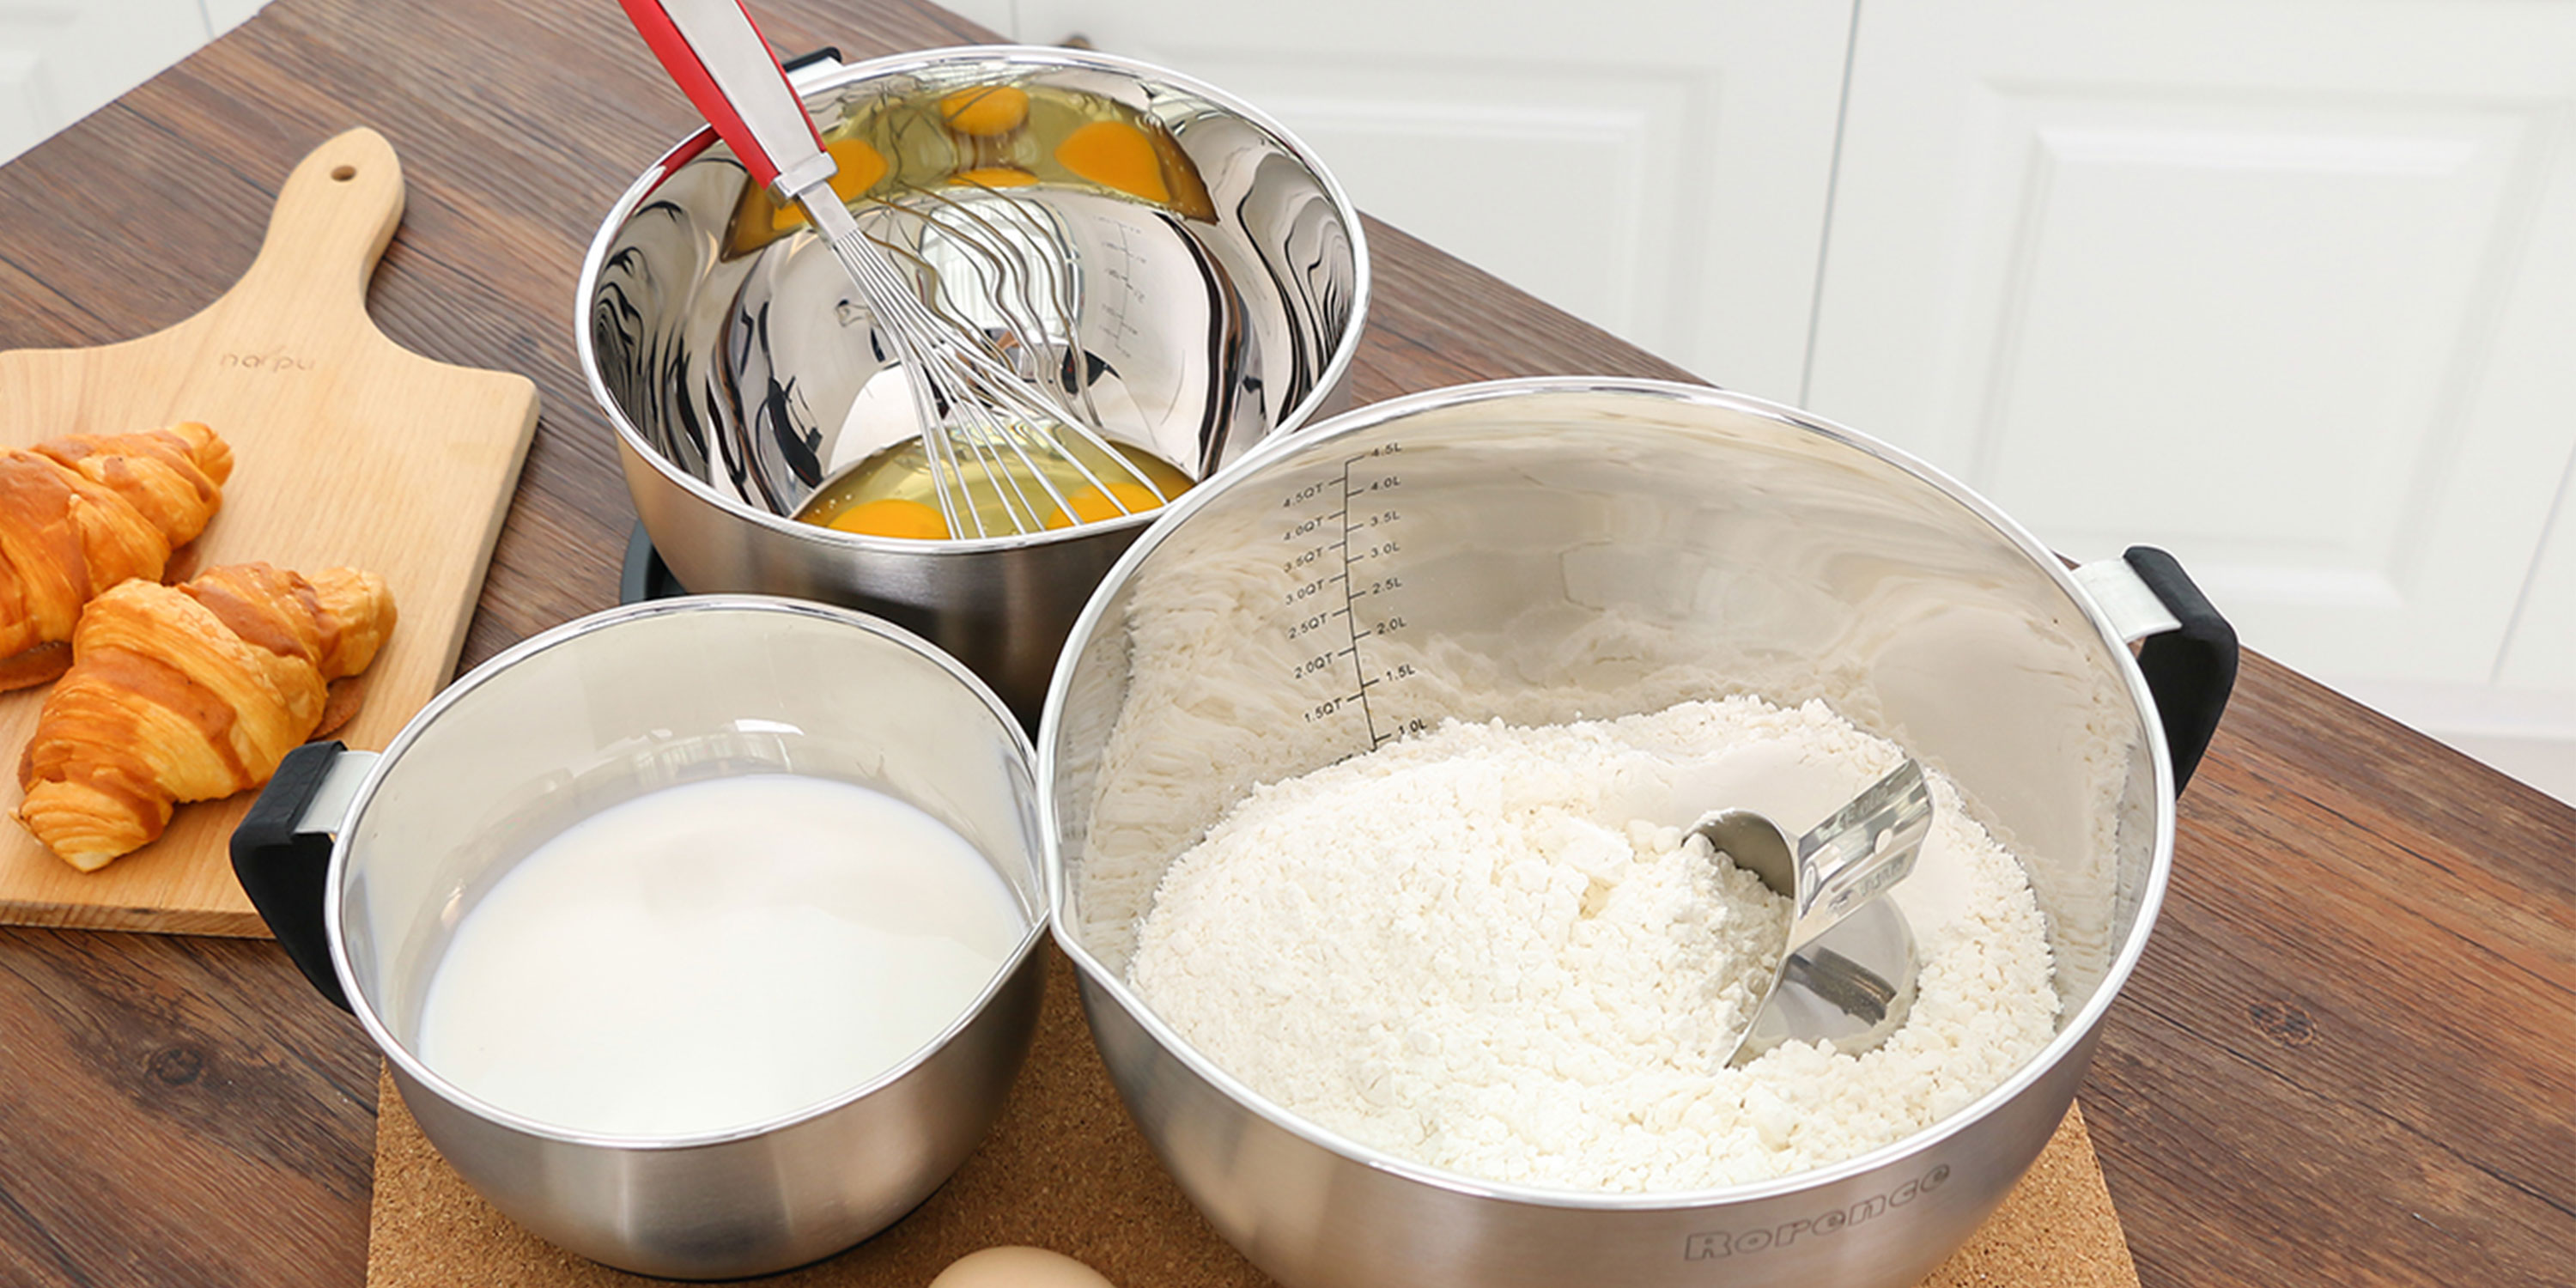 Sparkling Solutions: How to Clean Stainless Steel Mixing Bowls